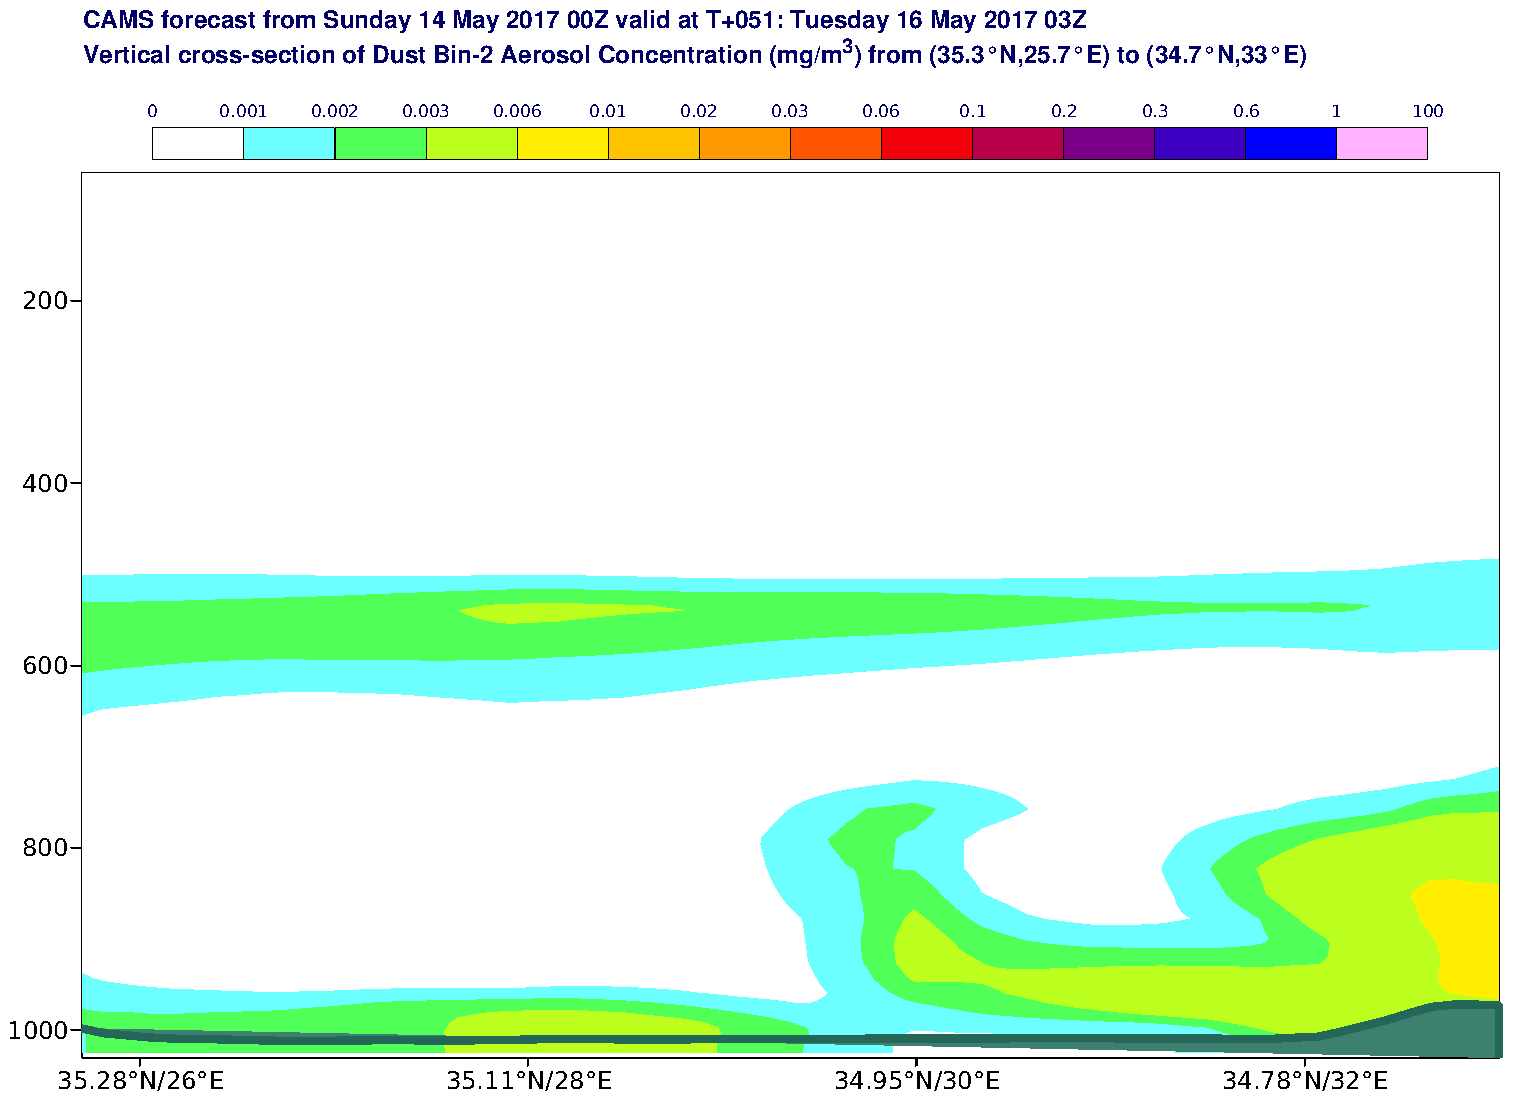 Vertical cross-section of Dust Bin-2 Aerosol Concentration (mg/m3) valid at T51 - 2017-05-16 03:00